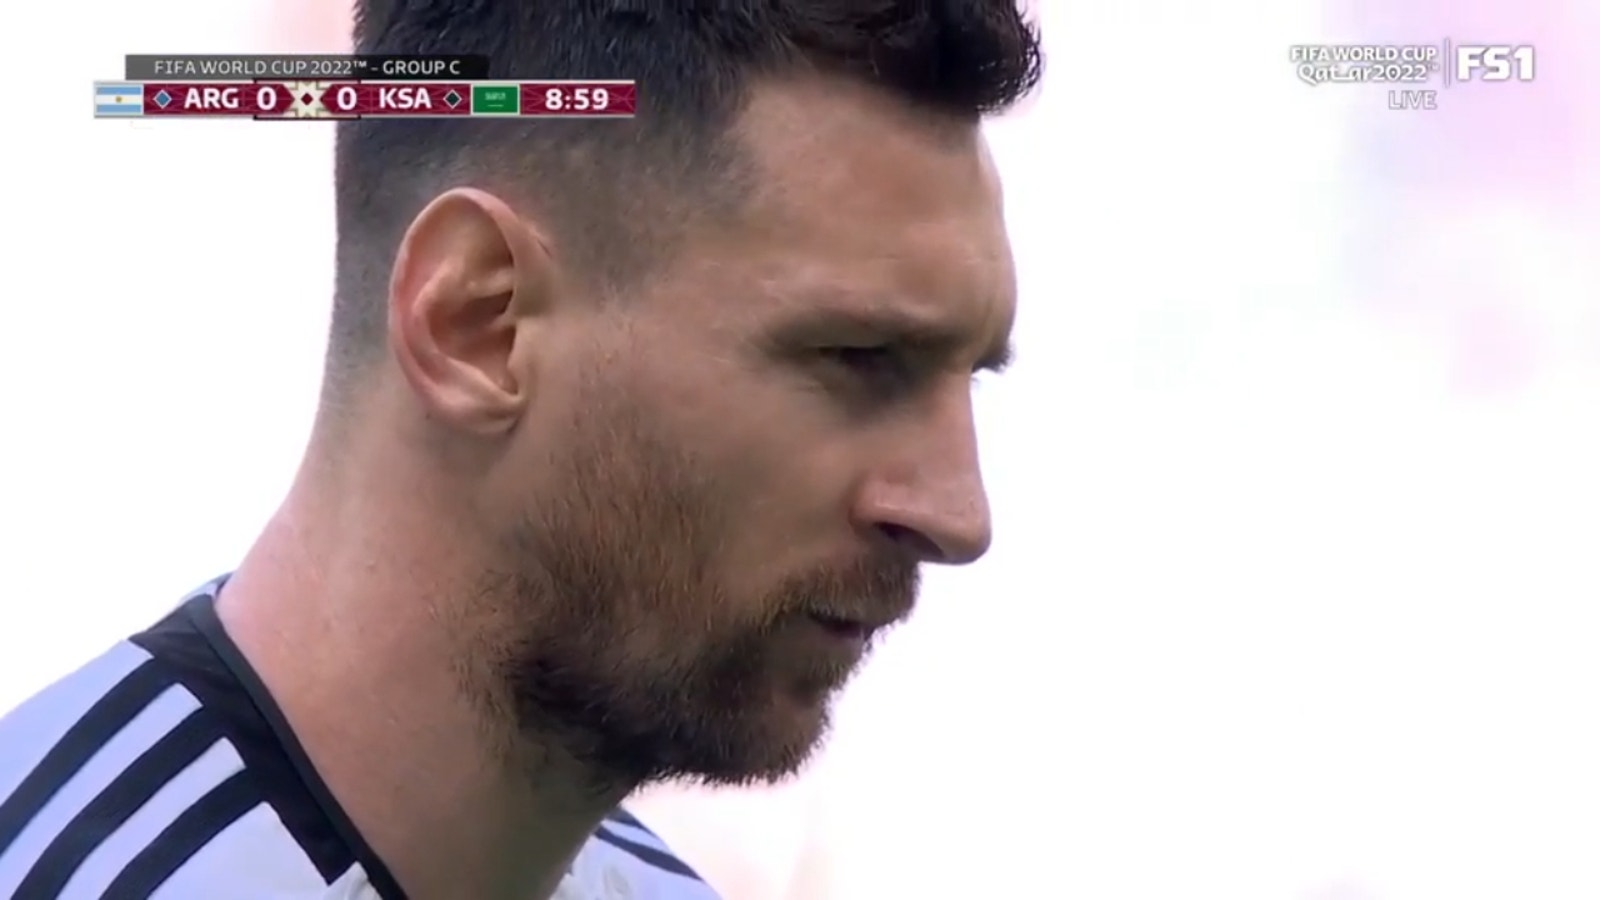 Lionel Messi scores a PK in the 10th minute to give Argentina a 1-0 lead in Saudi Arabia.